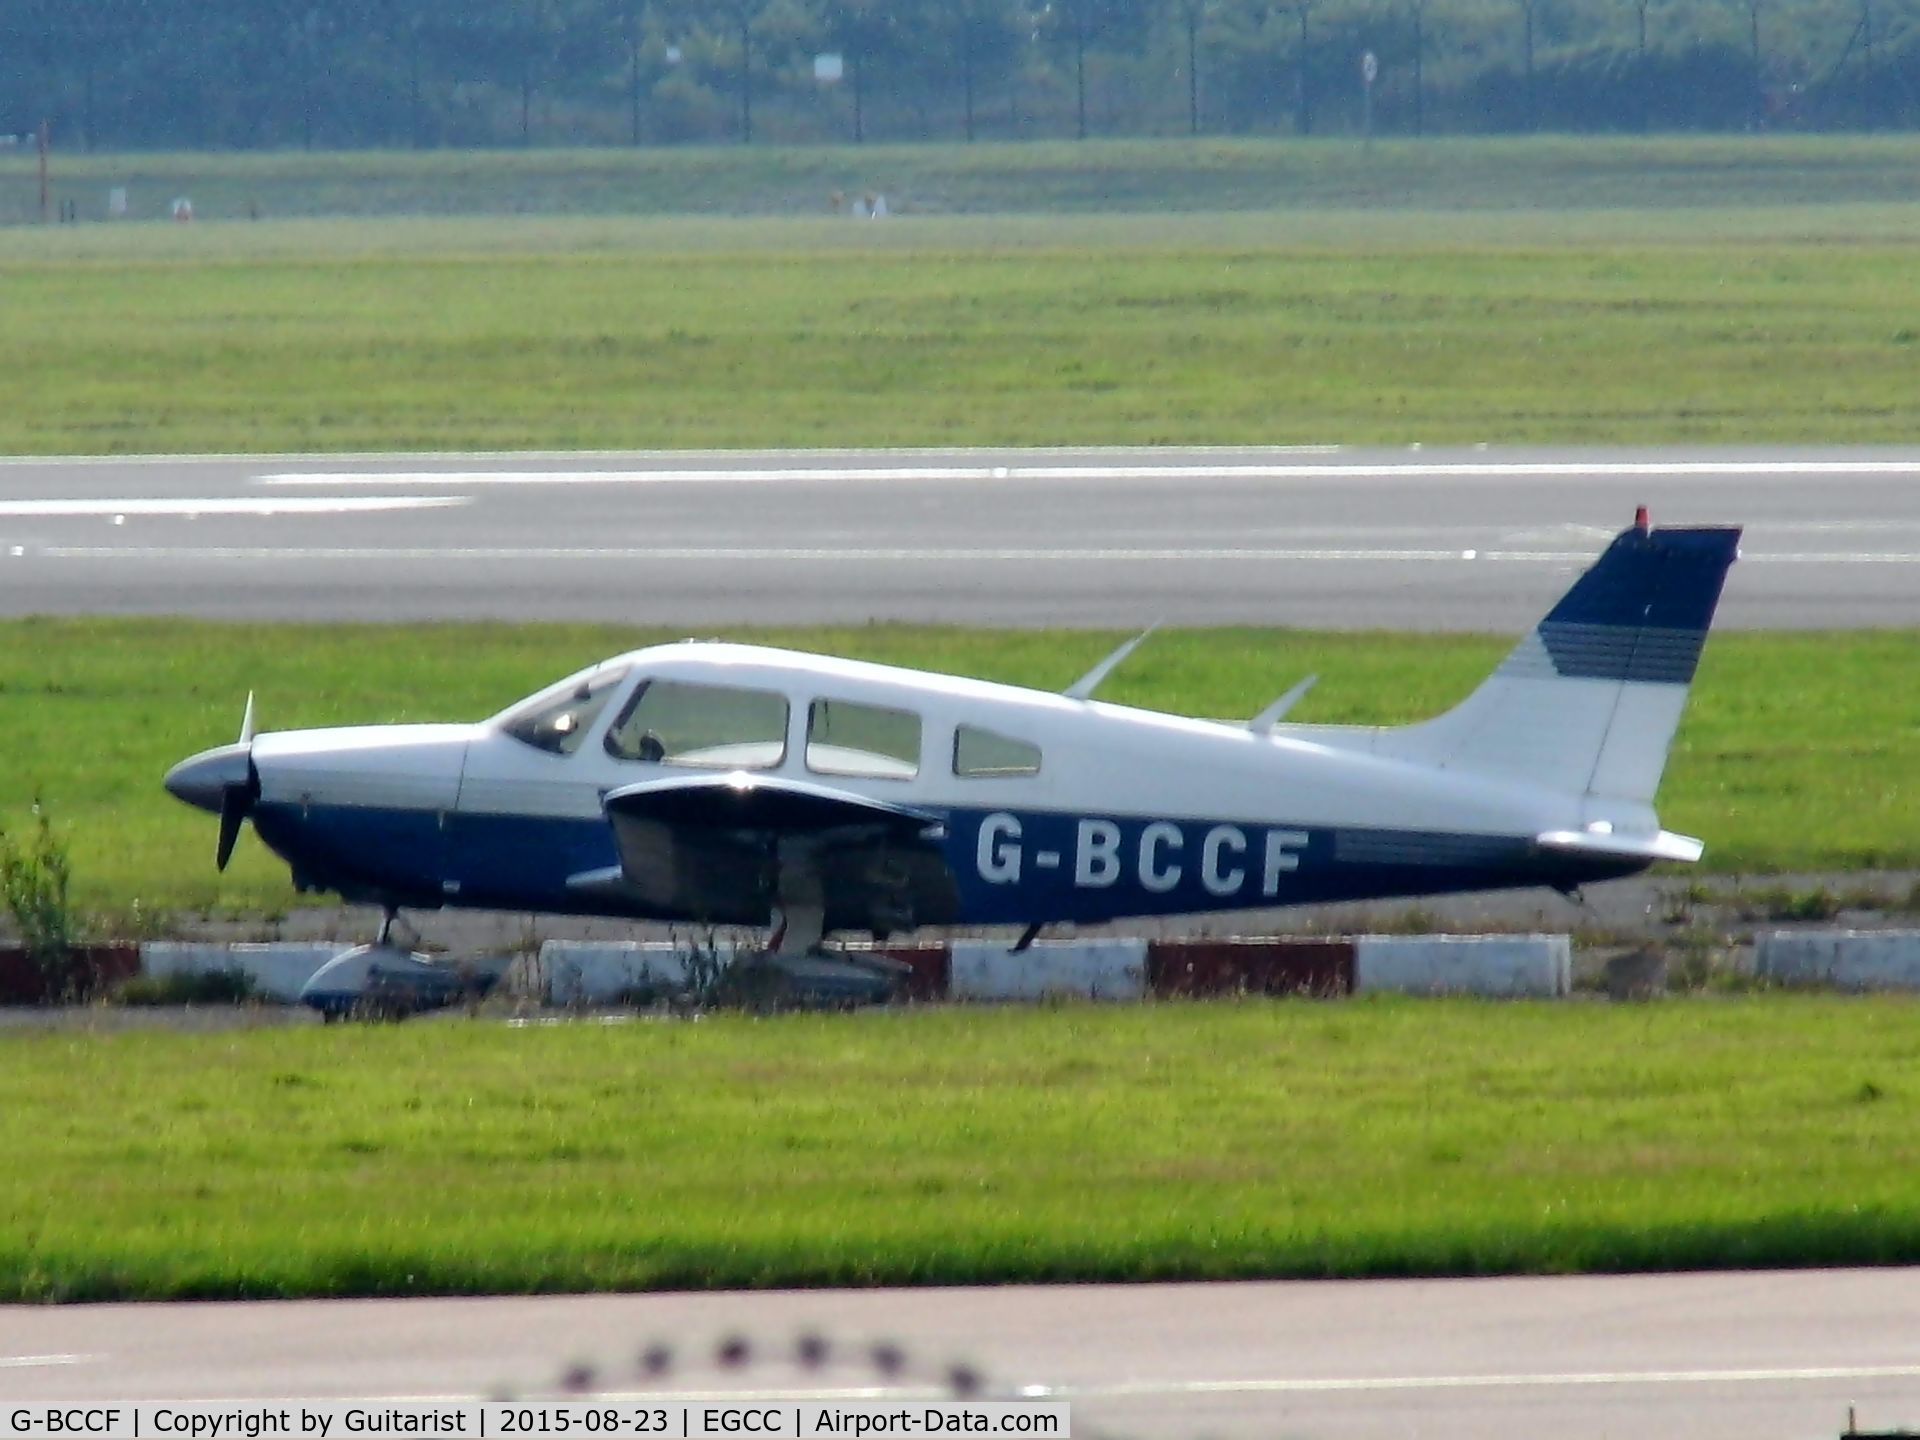 G-BCCF, 1973 Piper PA-28-180 Cherokee Archer C/N 28-7405069, At Manchester